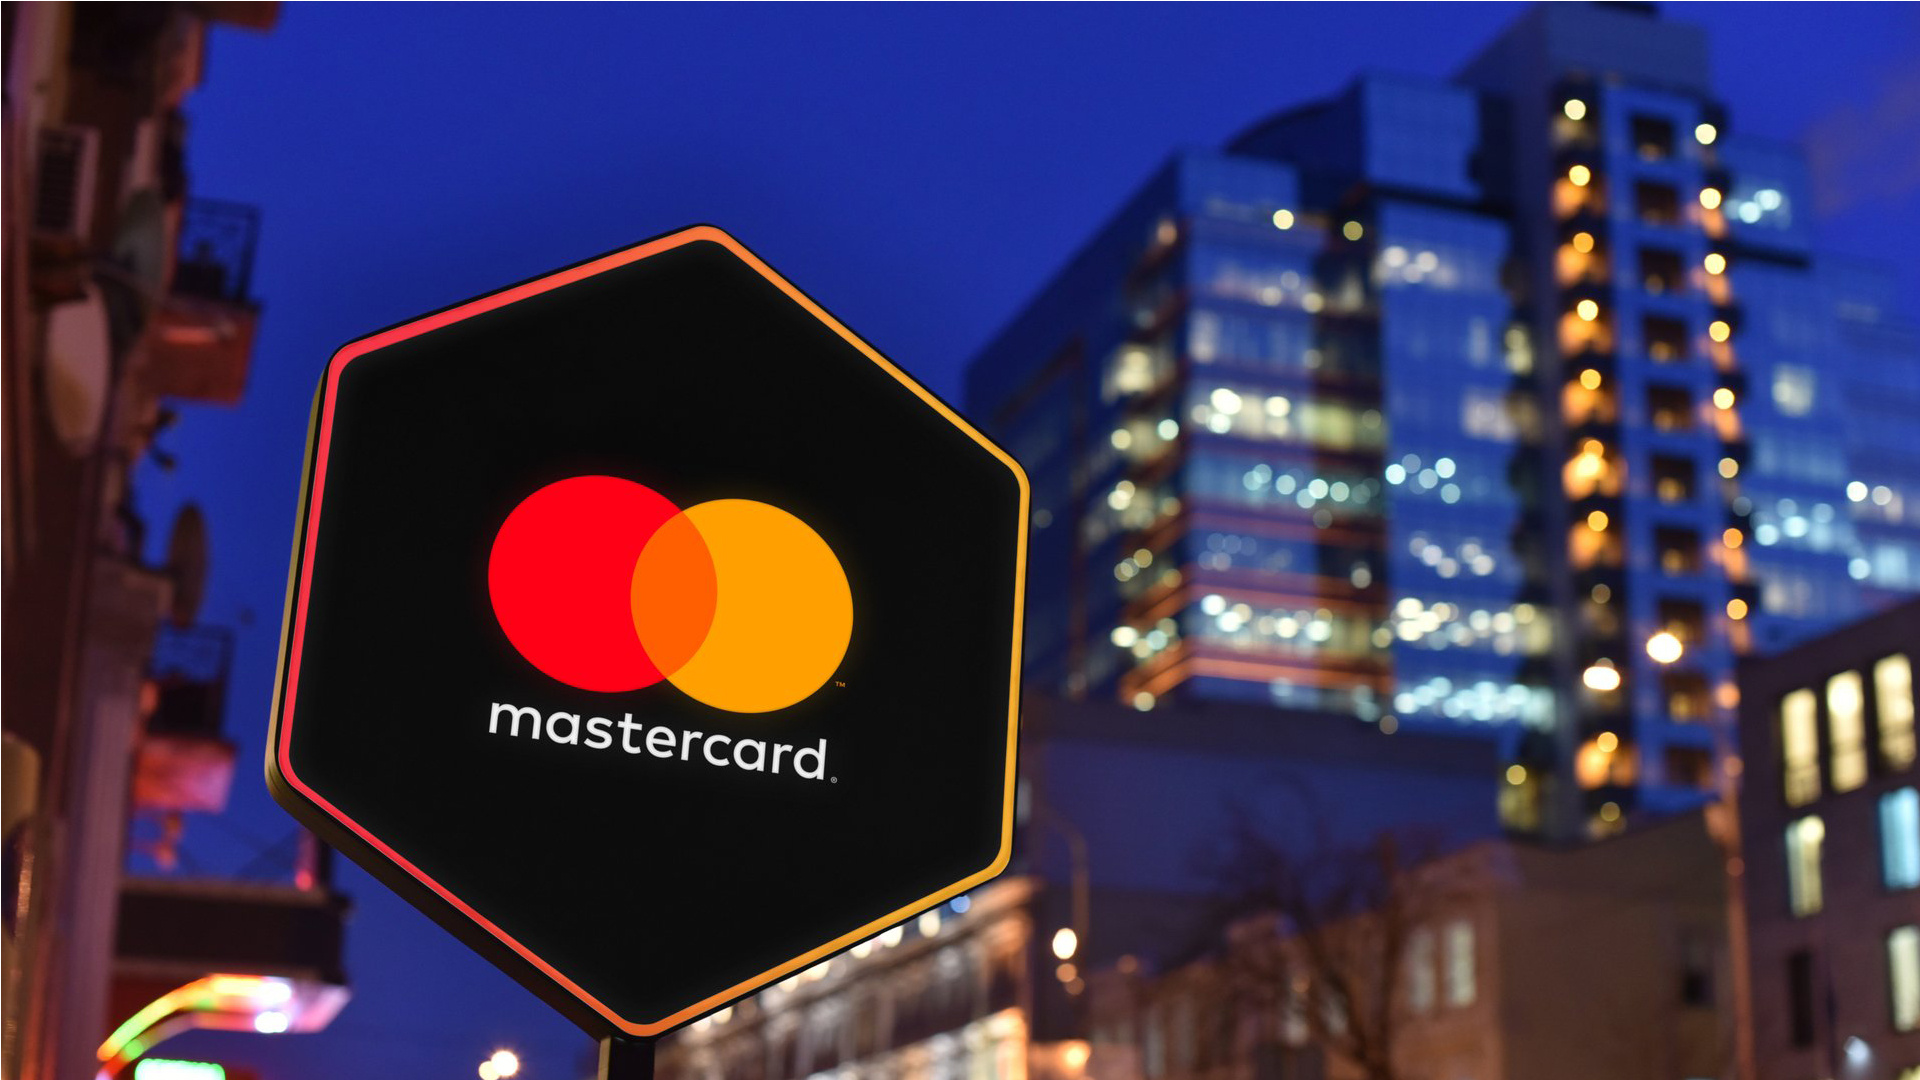 Mastercard: A global technology company in the payments industry, Digital economy. 1920x1080 Full HD Background.